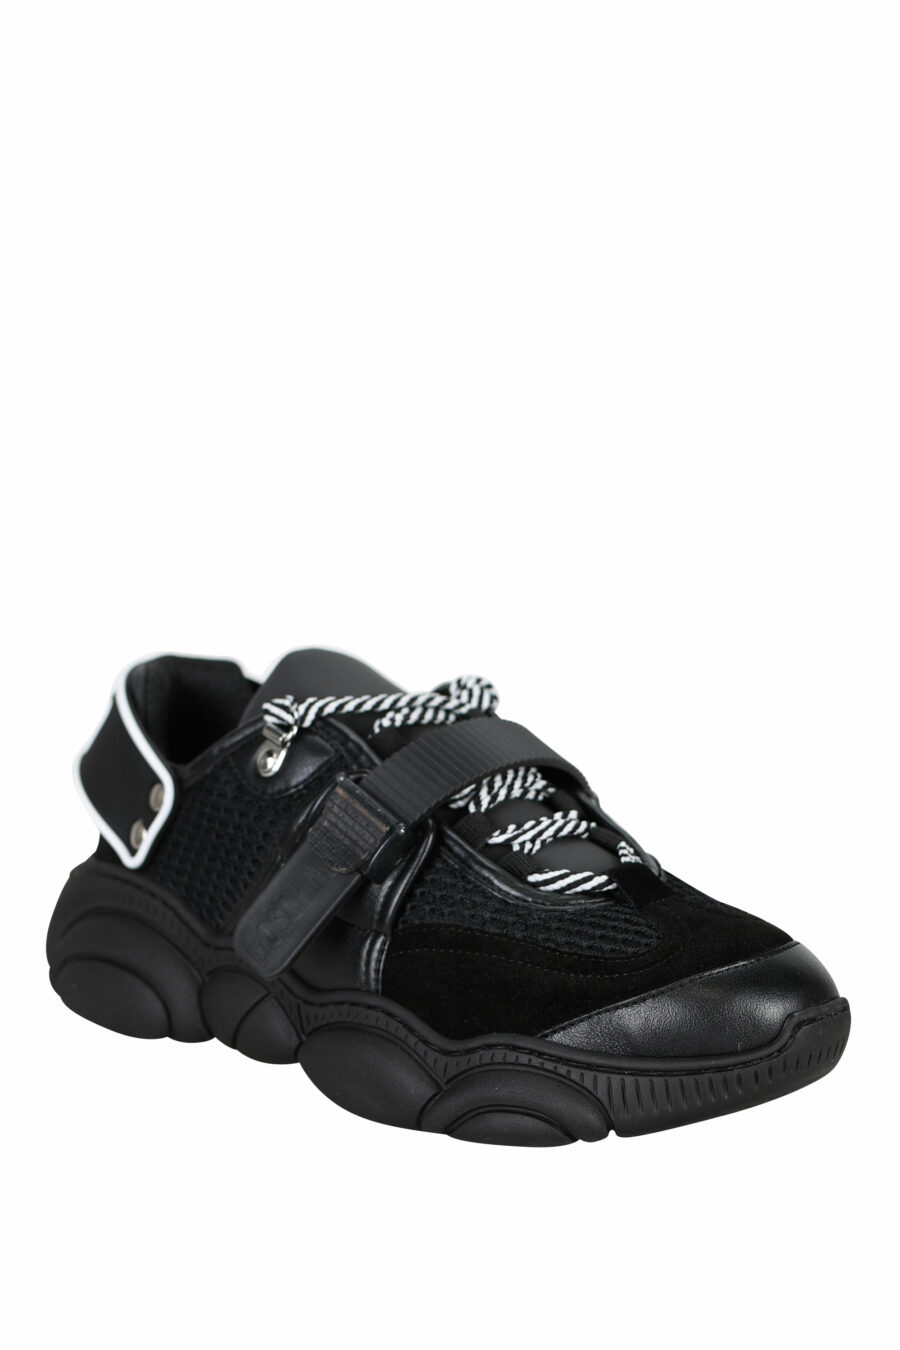 Black trainers with laces and velcro and rubber logo - 8054653226388 1